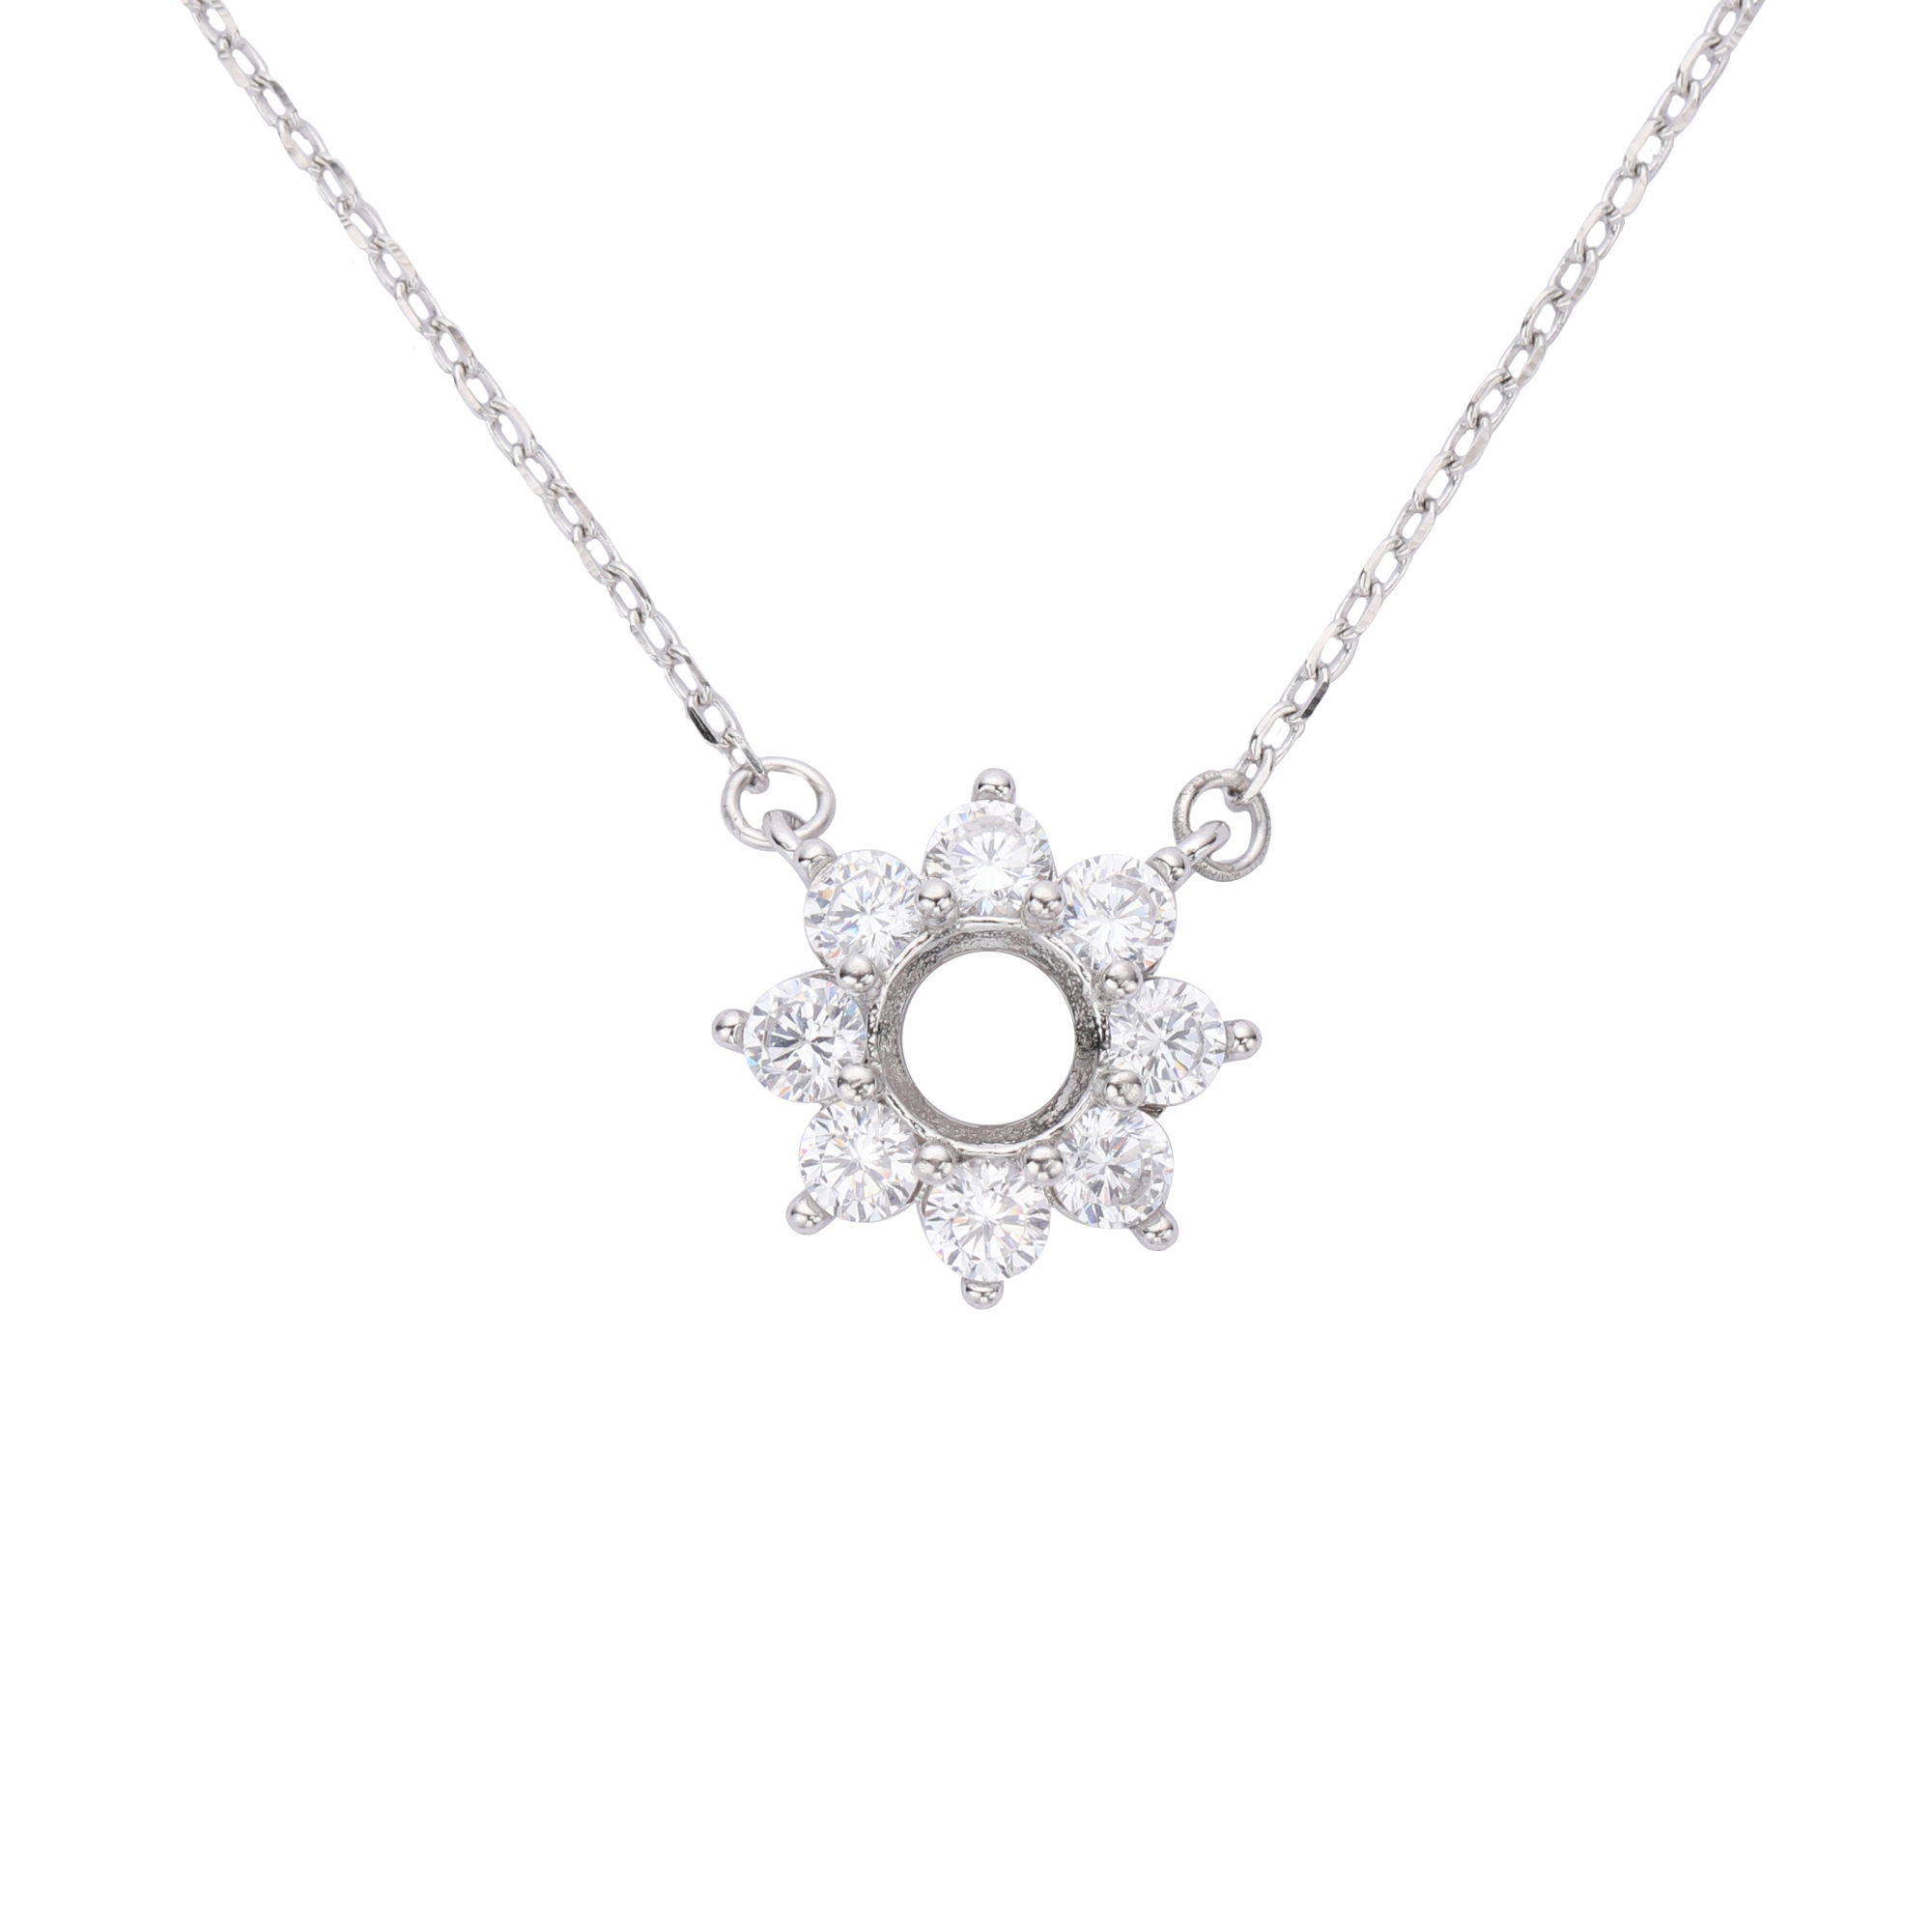 6MM Round Prong Pendant Settings,Sun Flower Solid 925 Sterling Sliver Rose Necklace,Pave CZ Stone Pendant,DIY Jewelry With Necklace Chain 16''+2'' 1431199 - Click Image to Close